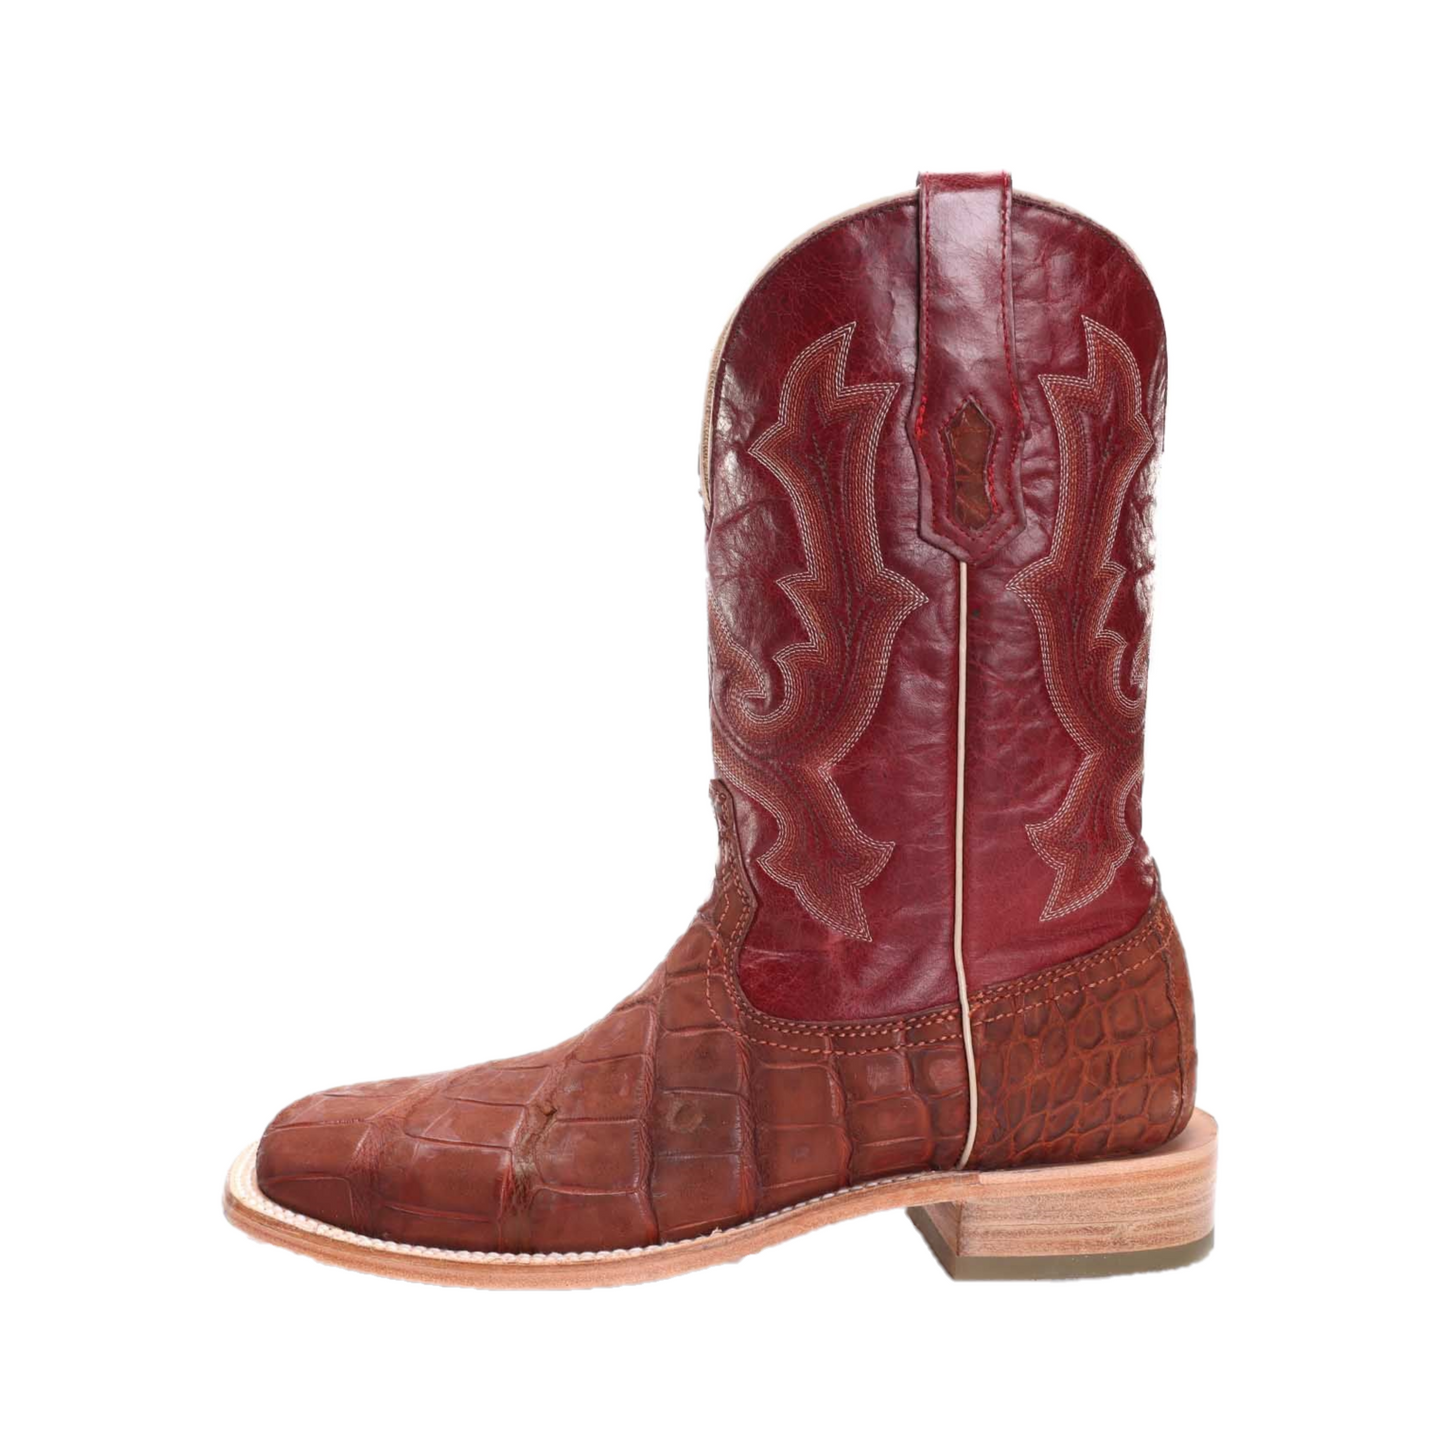 Corral Men's Cognac Red Alligator Wide Square Toe Western Boots A4222